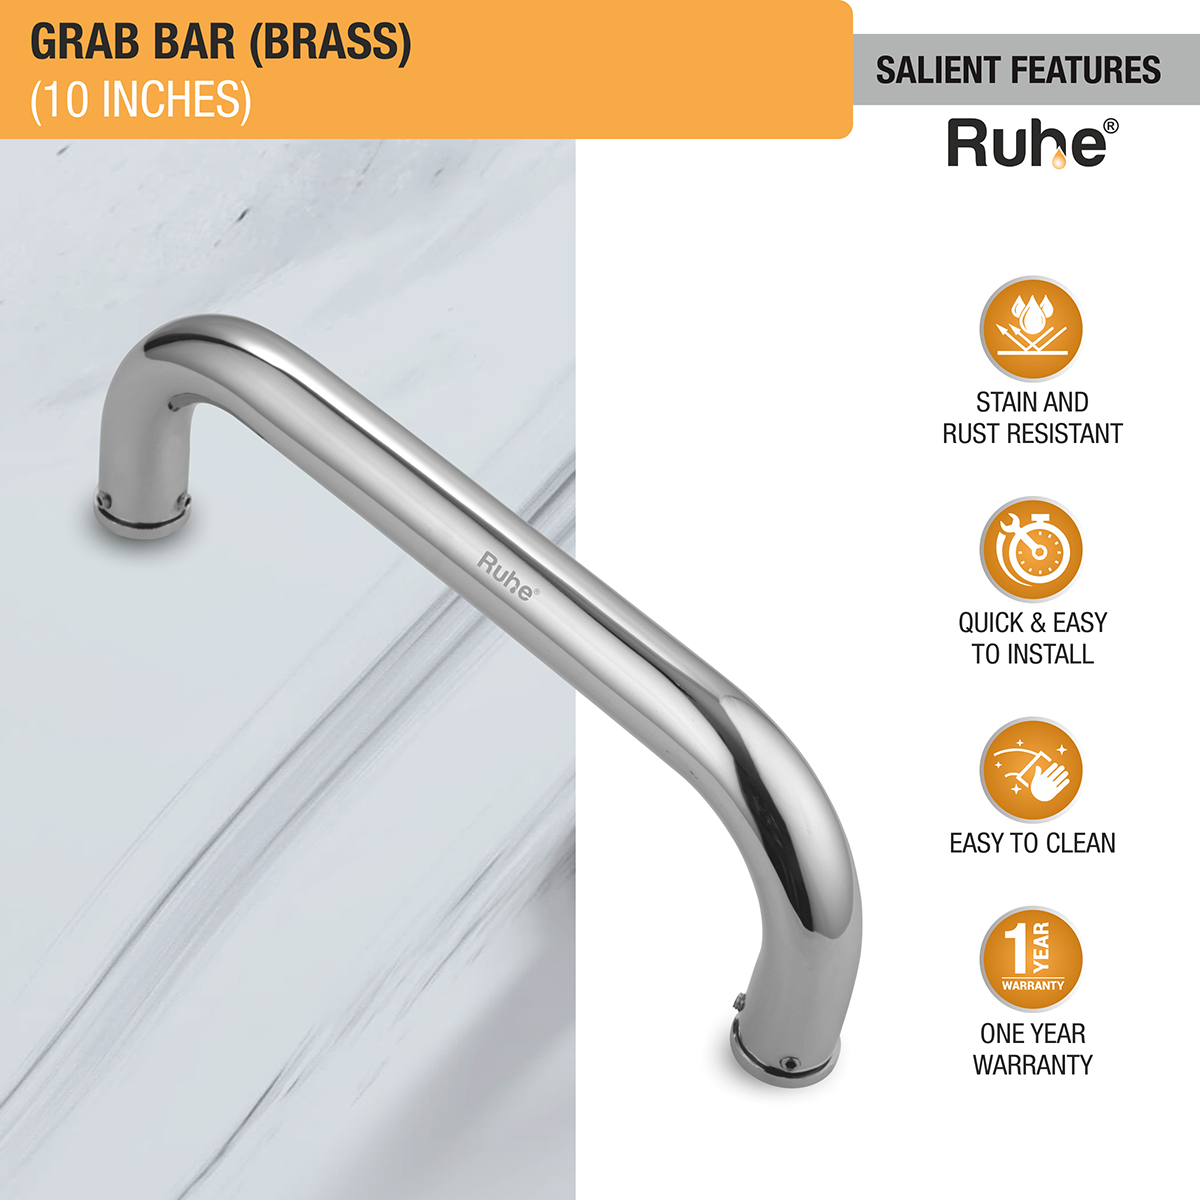 Brass Grab Bar (10 inches) features and benefits